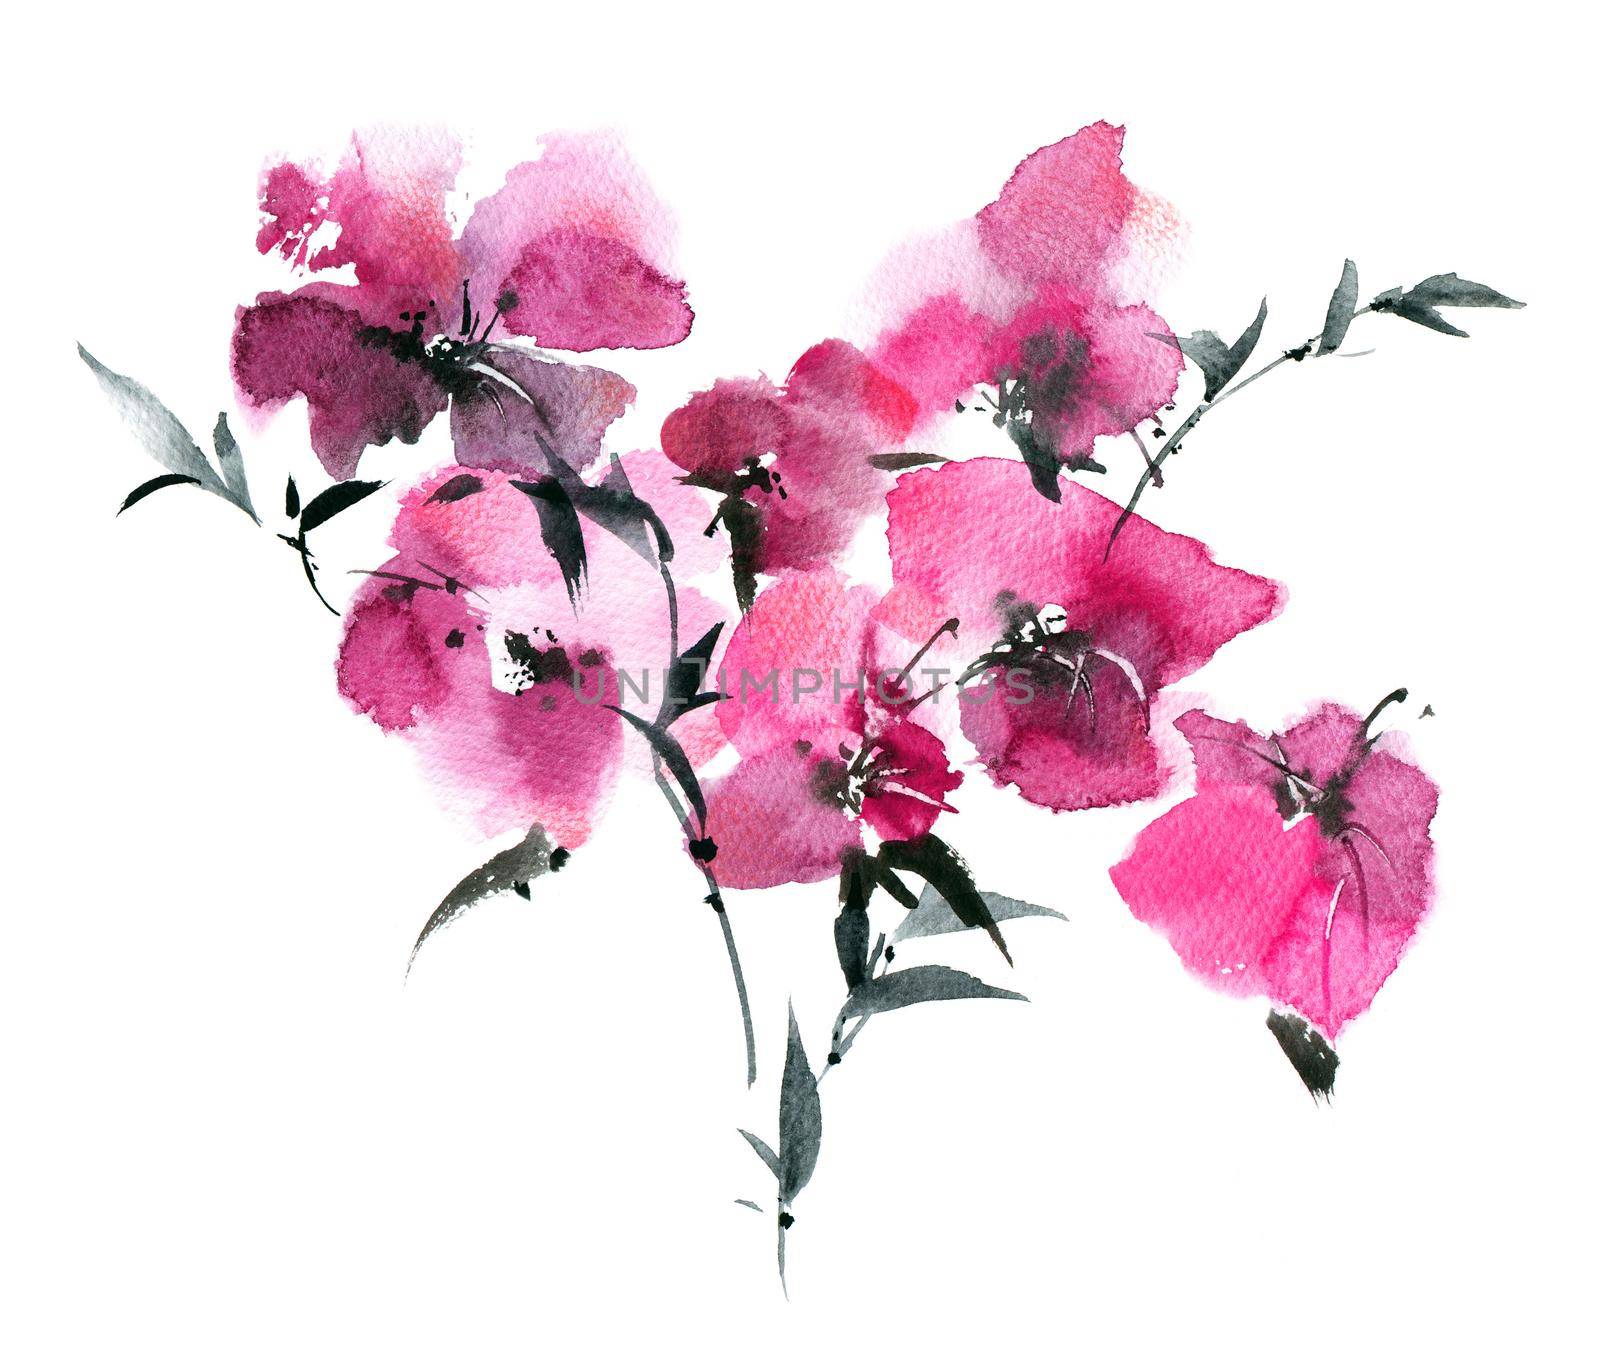 Watercolor illustration of pink flowers bouquet on white background. Oriental traditional sumi-e painting.